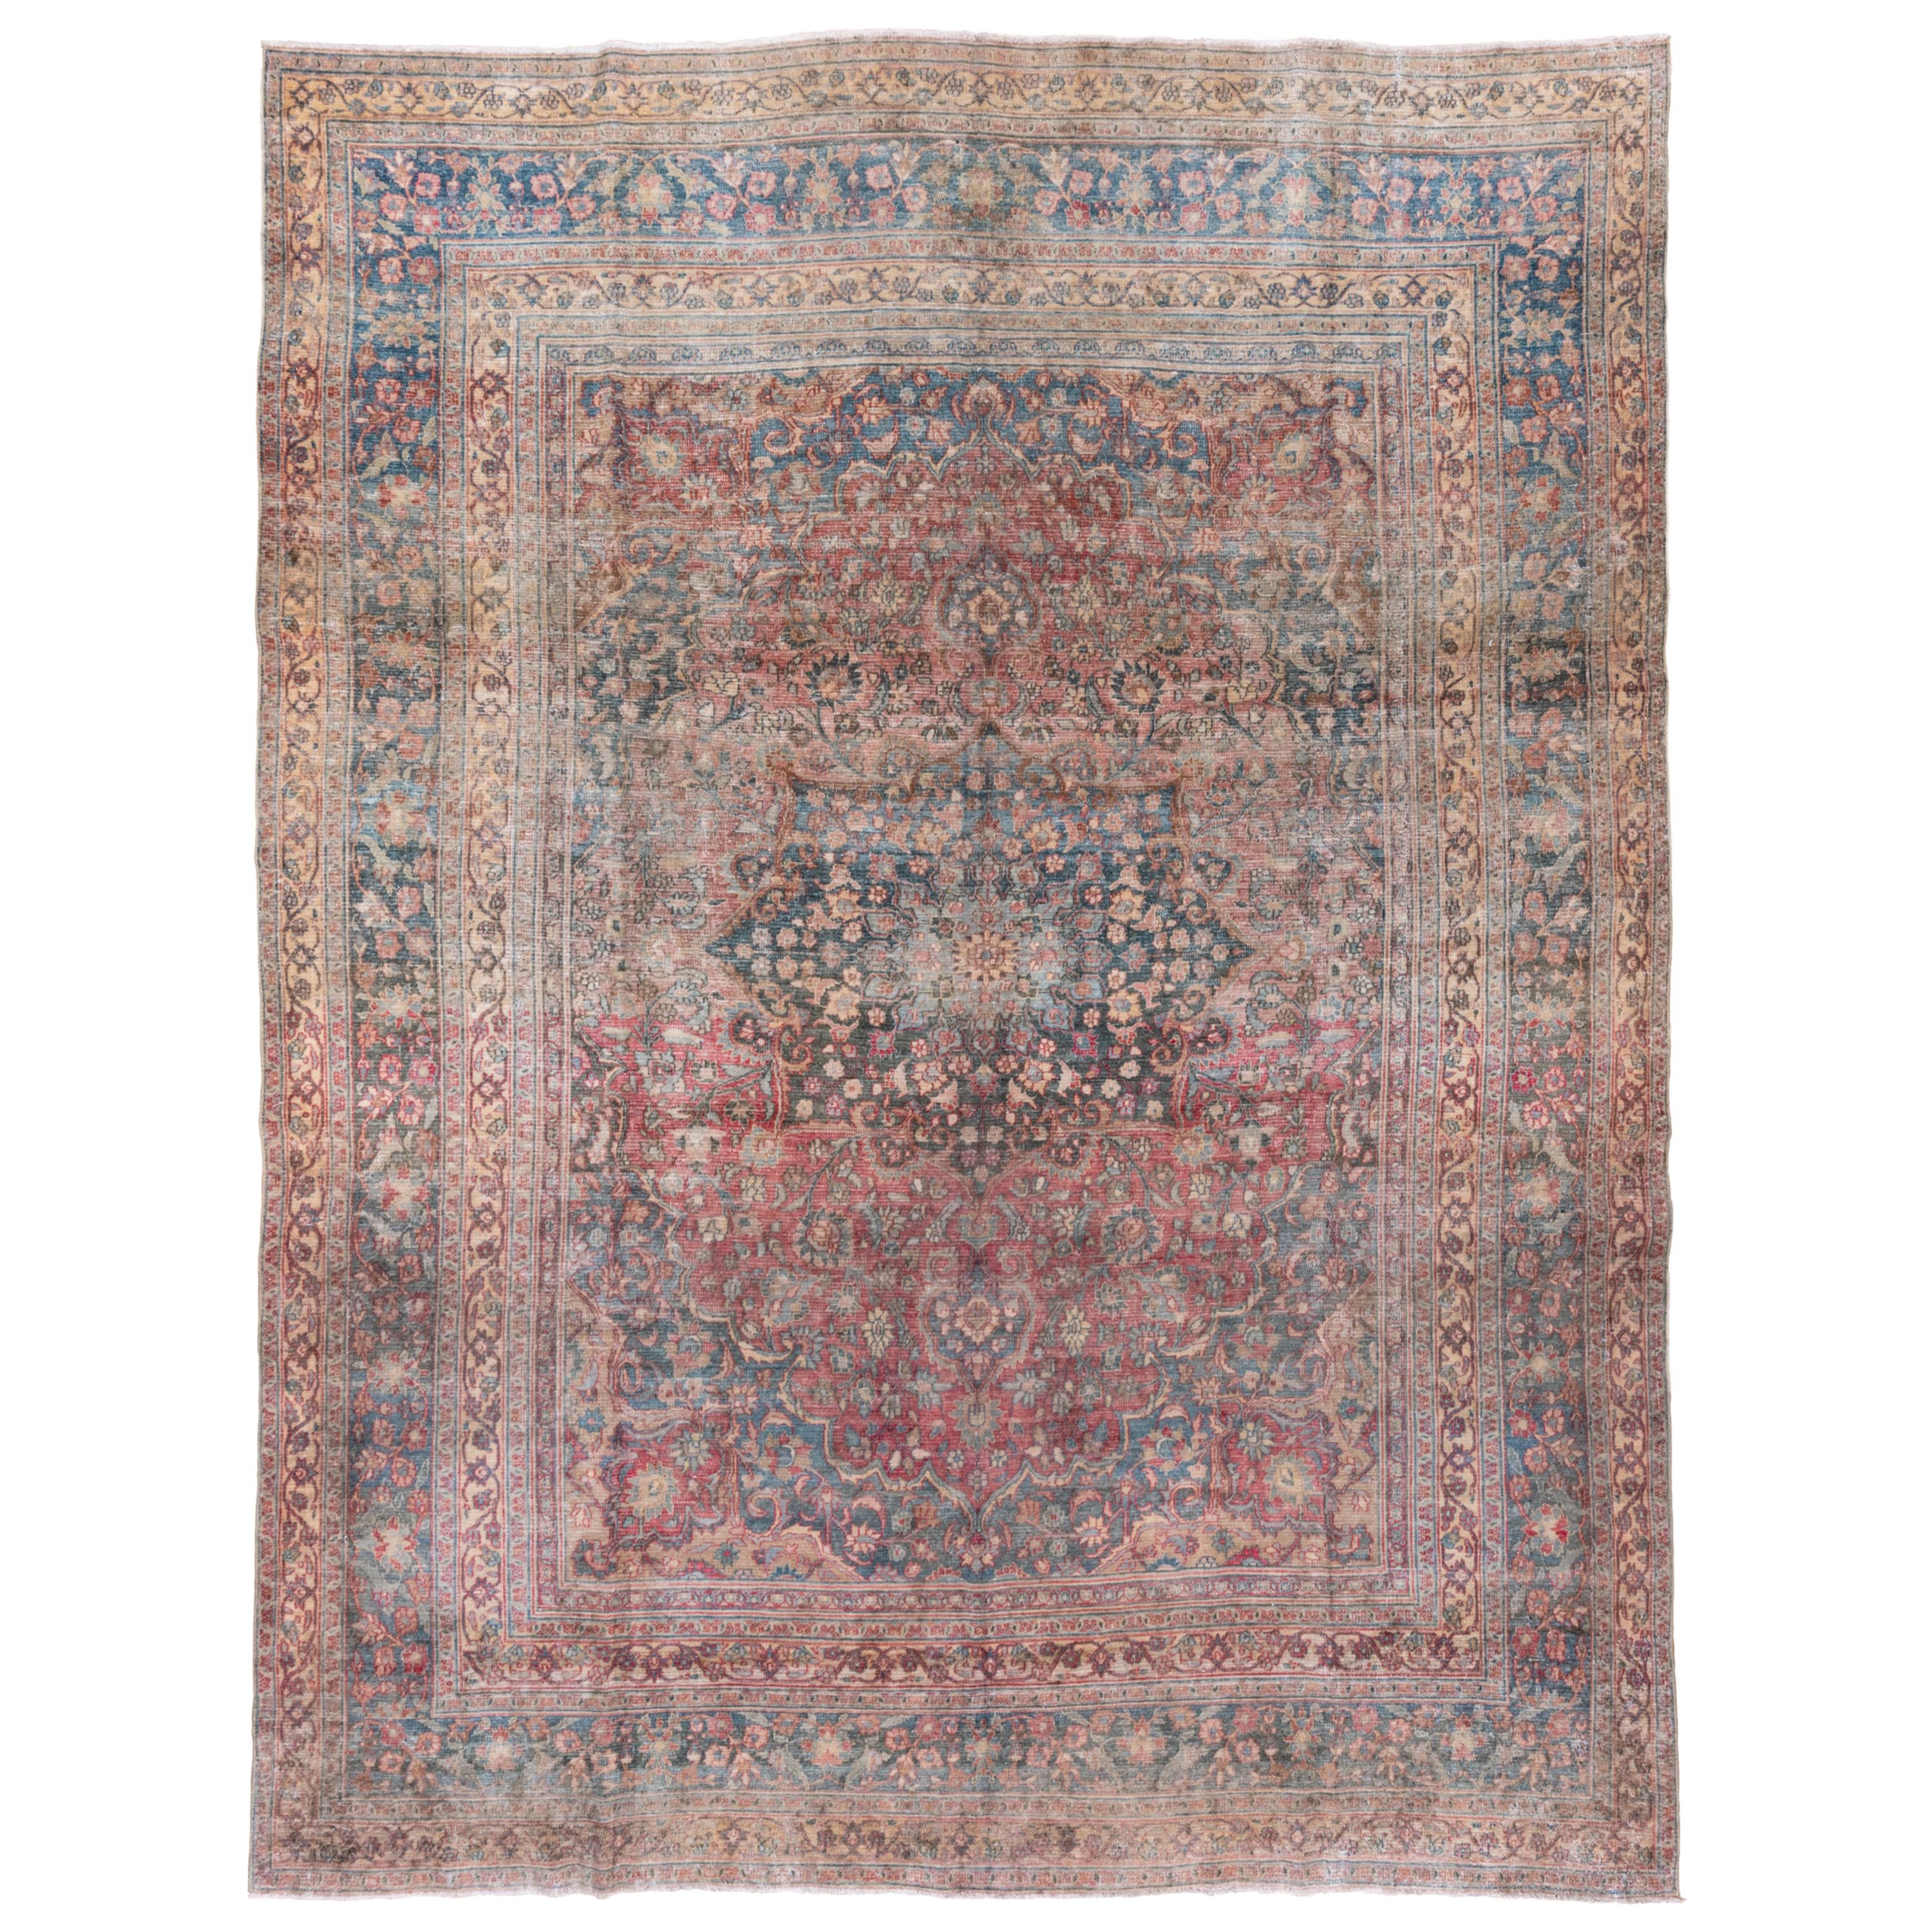 Shabby Chic Persian Khorassan Rug with Pink & Teal Tones, Circa 1930s